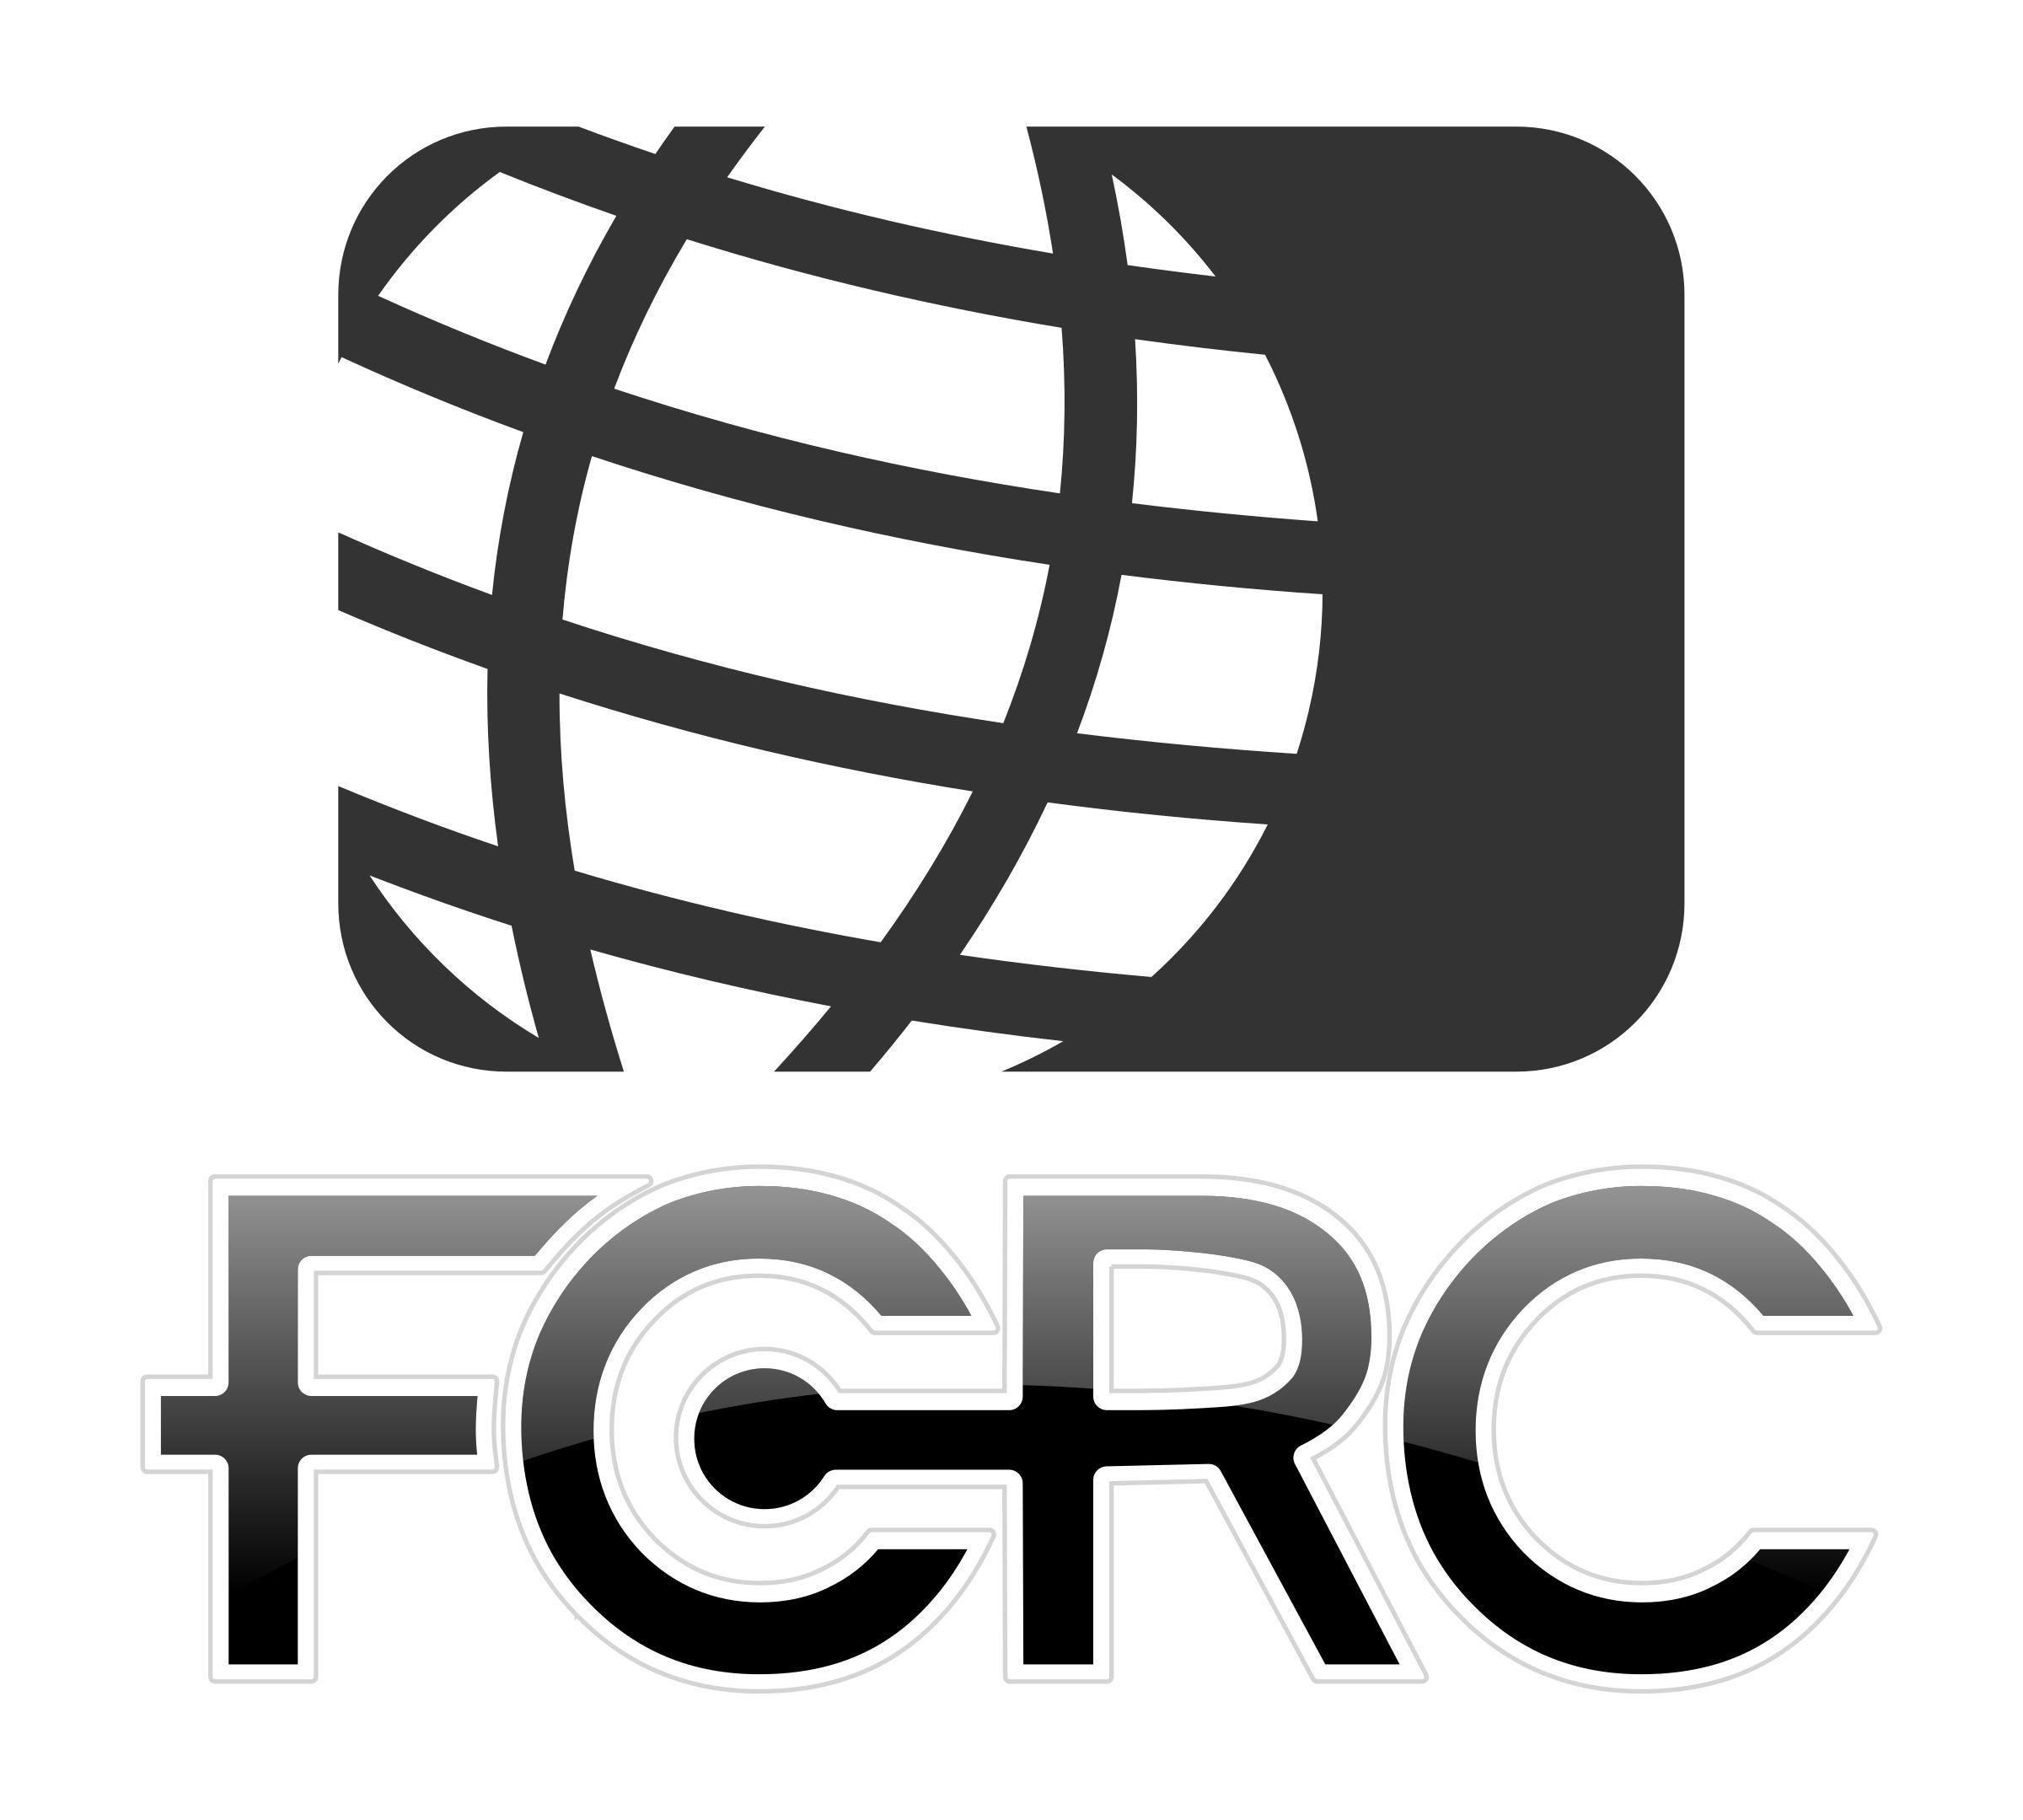 Gray and White Globe Logo - FCRC globe logo 2 Icon PNG PNG and Icon Downloads